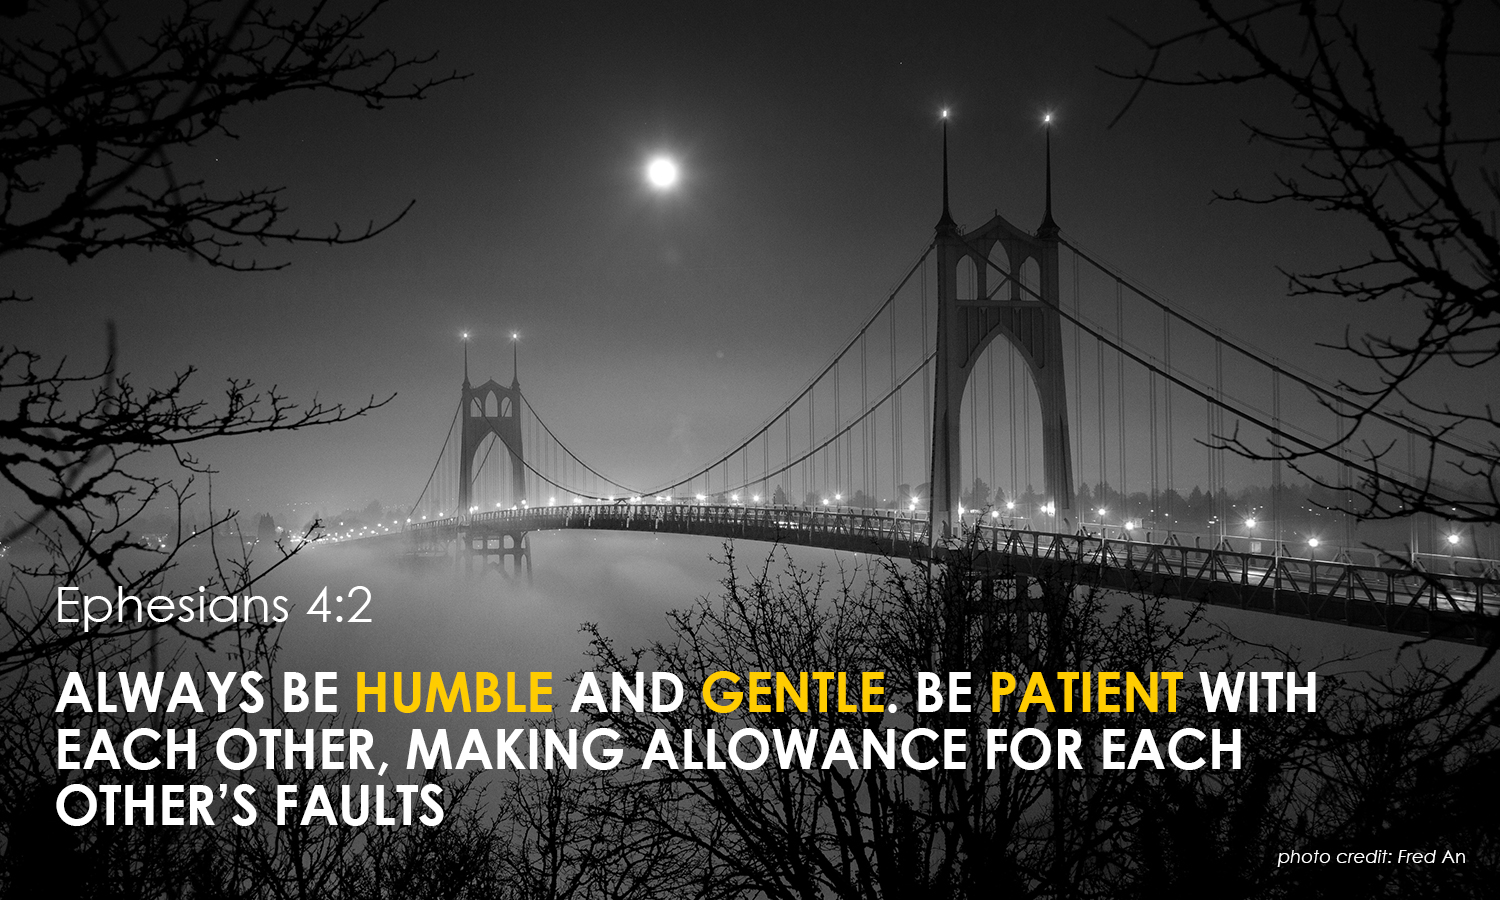 Ephesians 4:2 Always be humble and gentle. Be patient with each other, making allowance for each other’s faults